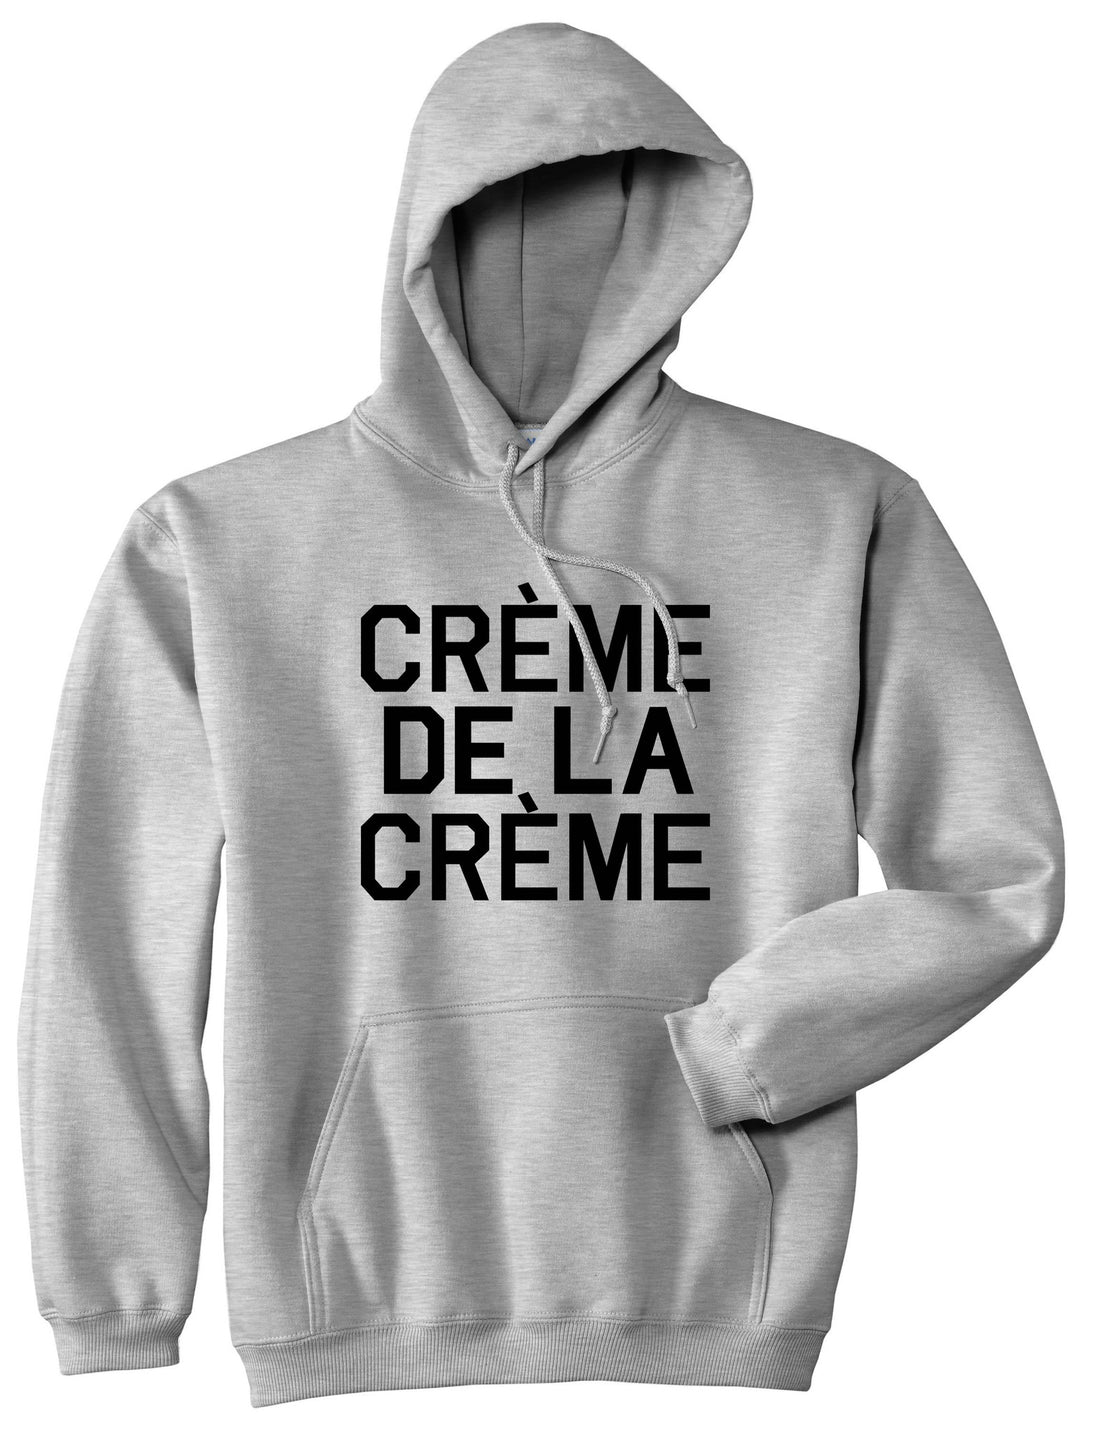 Creme De La Creme Celebrity Fashion Crop Boys Kids Pullover Hoodie Hoody In Grey by Kings Of NY